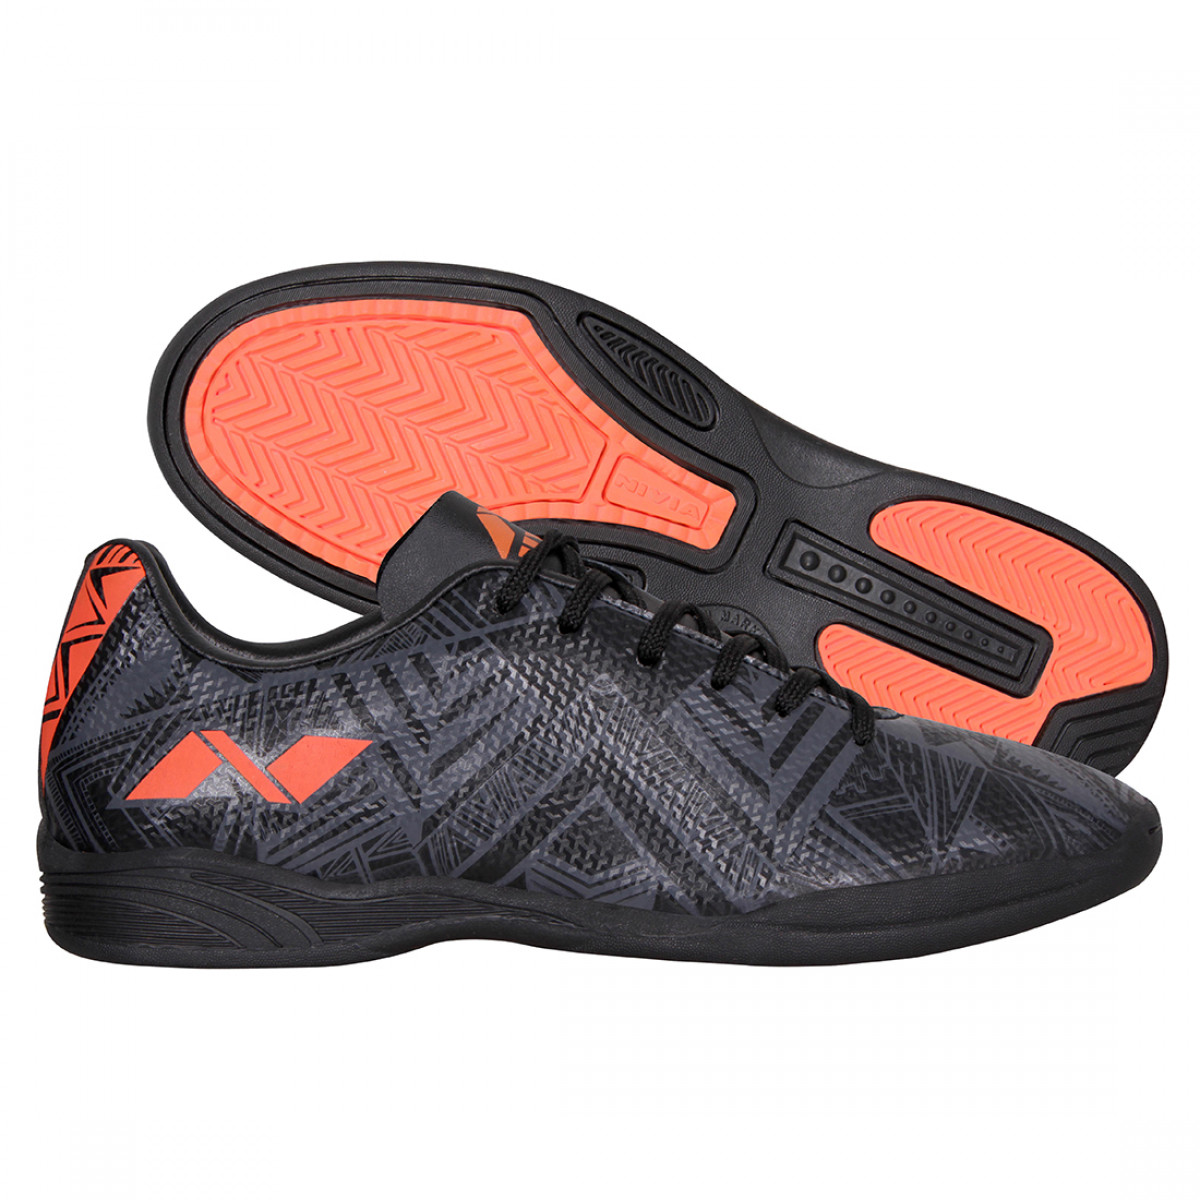 Nivia Force Football Shoes For Men (Futsal and Indoor use)